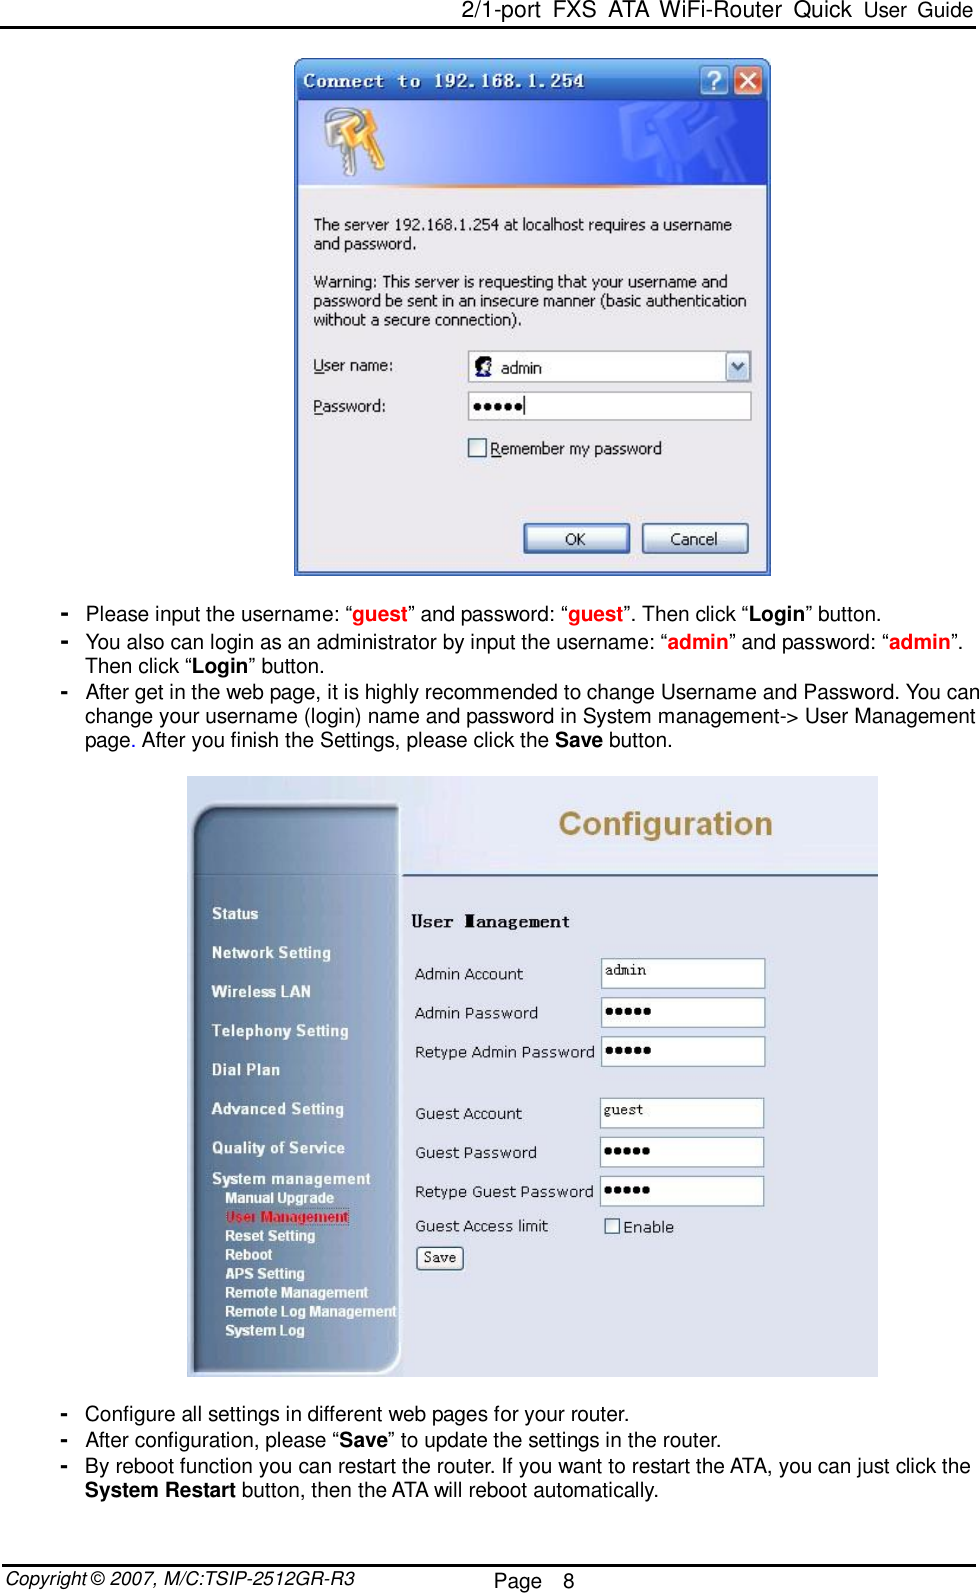  2/1-port FXS ATA WiFi-Router Quick User Guide  Copyright © 2007, M/C:TSIP-2512GR-R3  Page  8       -  Please input the username: “guest” and password: “guest”. Then click “Login” button. -  You also can login as an administrator by input the username: “admin” and password: “admin”. Then click “Login” button. -  After get in the web page, it is highly recommended to change Username and Password. You can change your username (login) name and password in System management-&gt; User Management page. After you finish the Settings, please click the Save button.    -  Configure all settings in different web pages for your router. -  After configuration, please “Save” to update the settings in the router.  -  By reboot function you can restart the router. If you want to restart the ATA, you can just click the System Restart button, then the ATA will reboot automatically. 